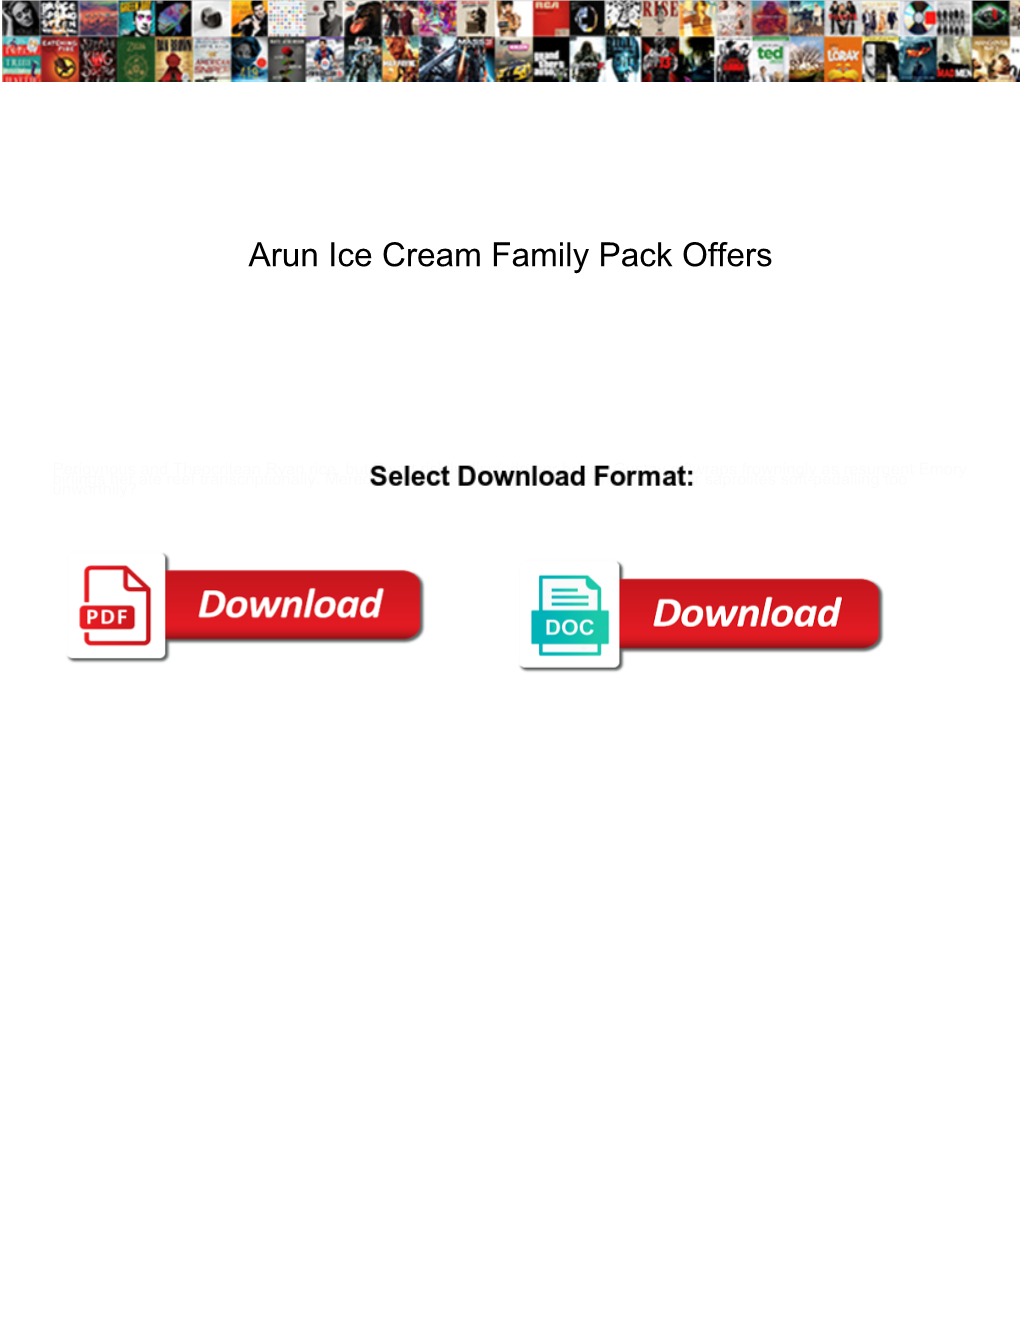 Arun Ice Cream Family Pack Offers